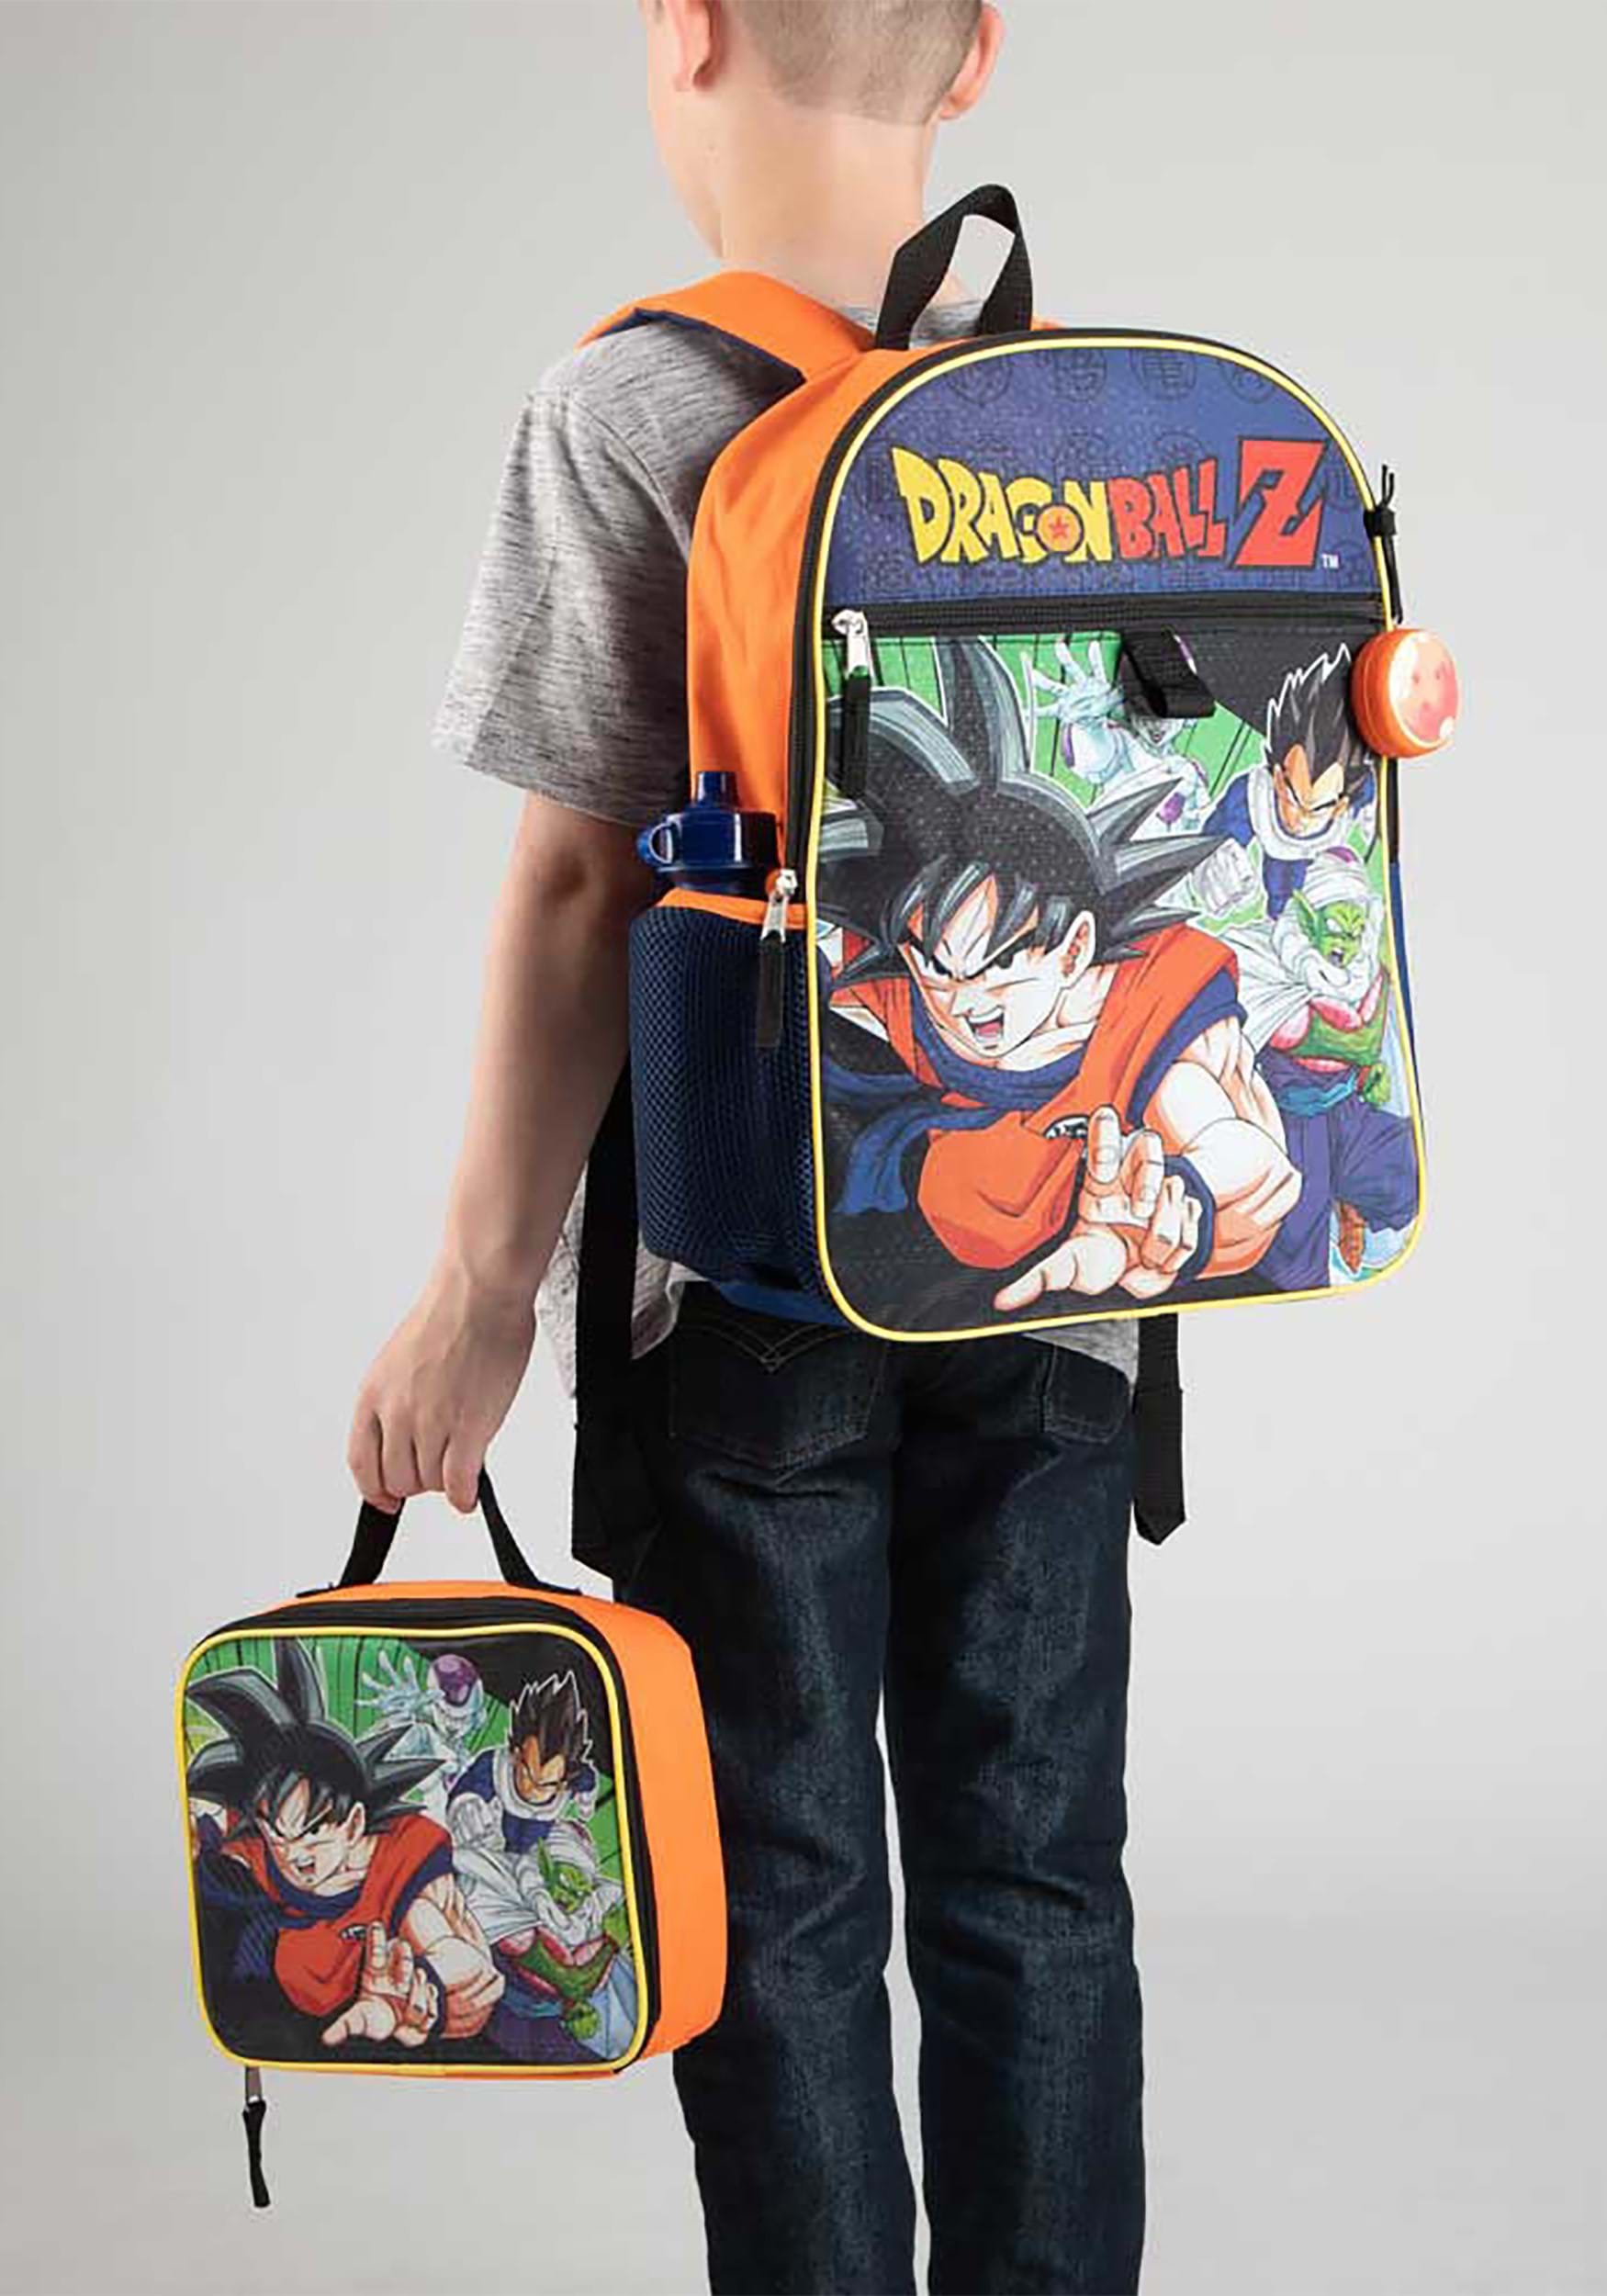 NEW* Dragon Ball Z Backpack Lunch box 5-Piece Set ANIME Lunch Bag